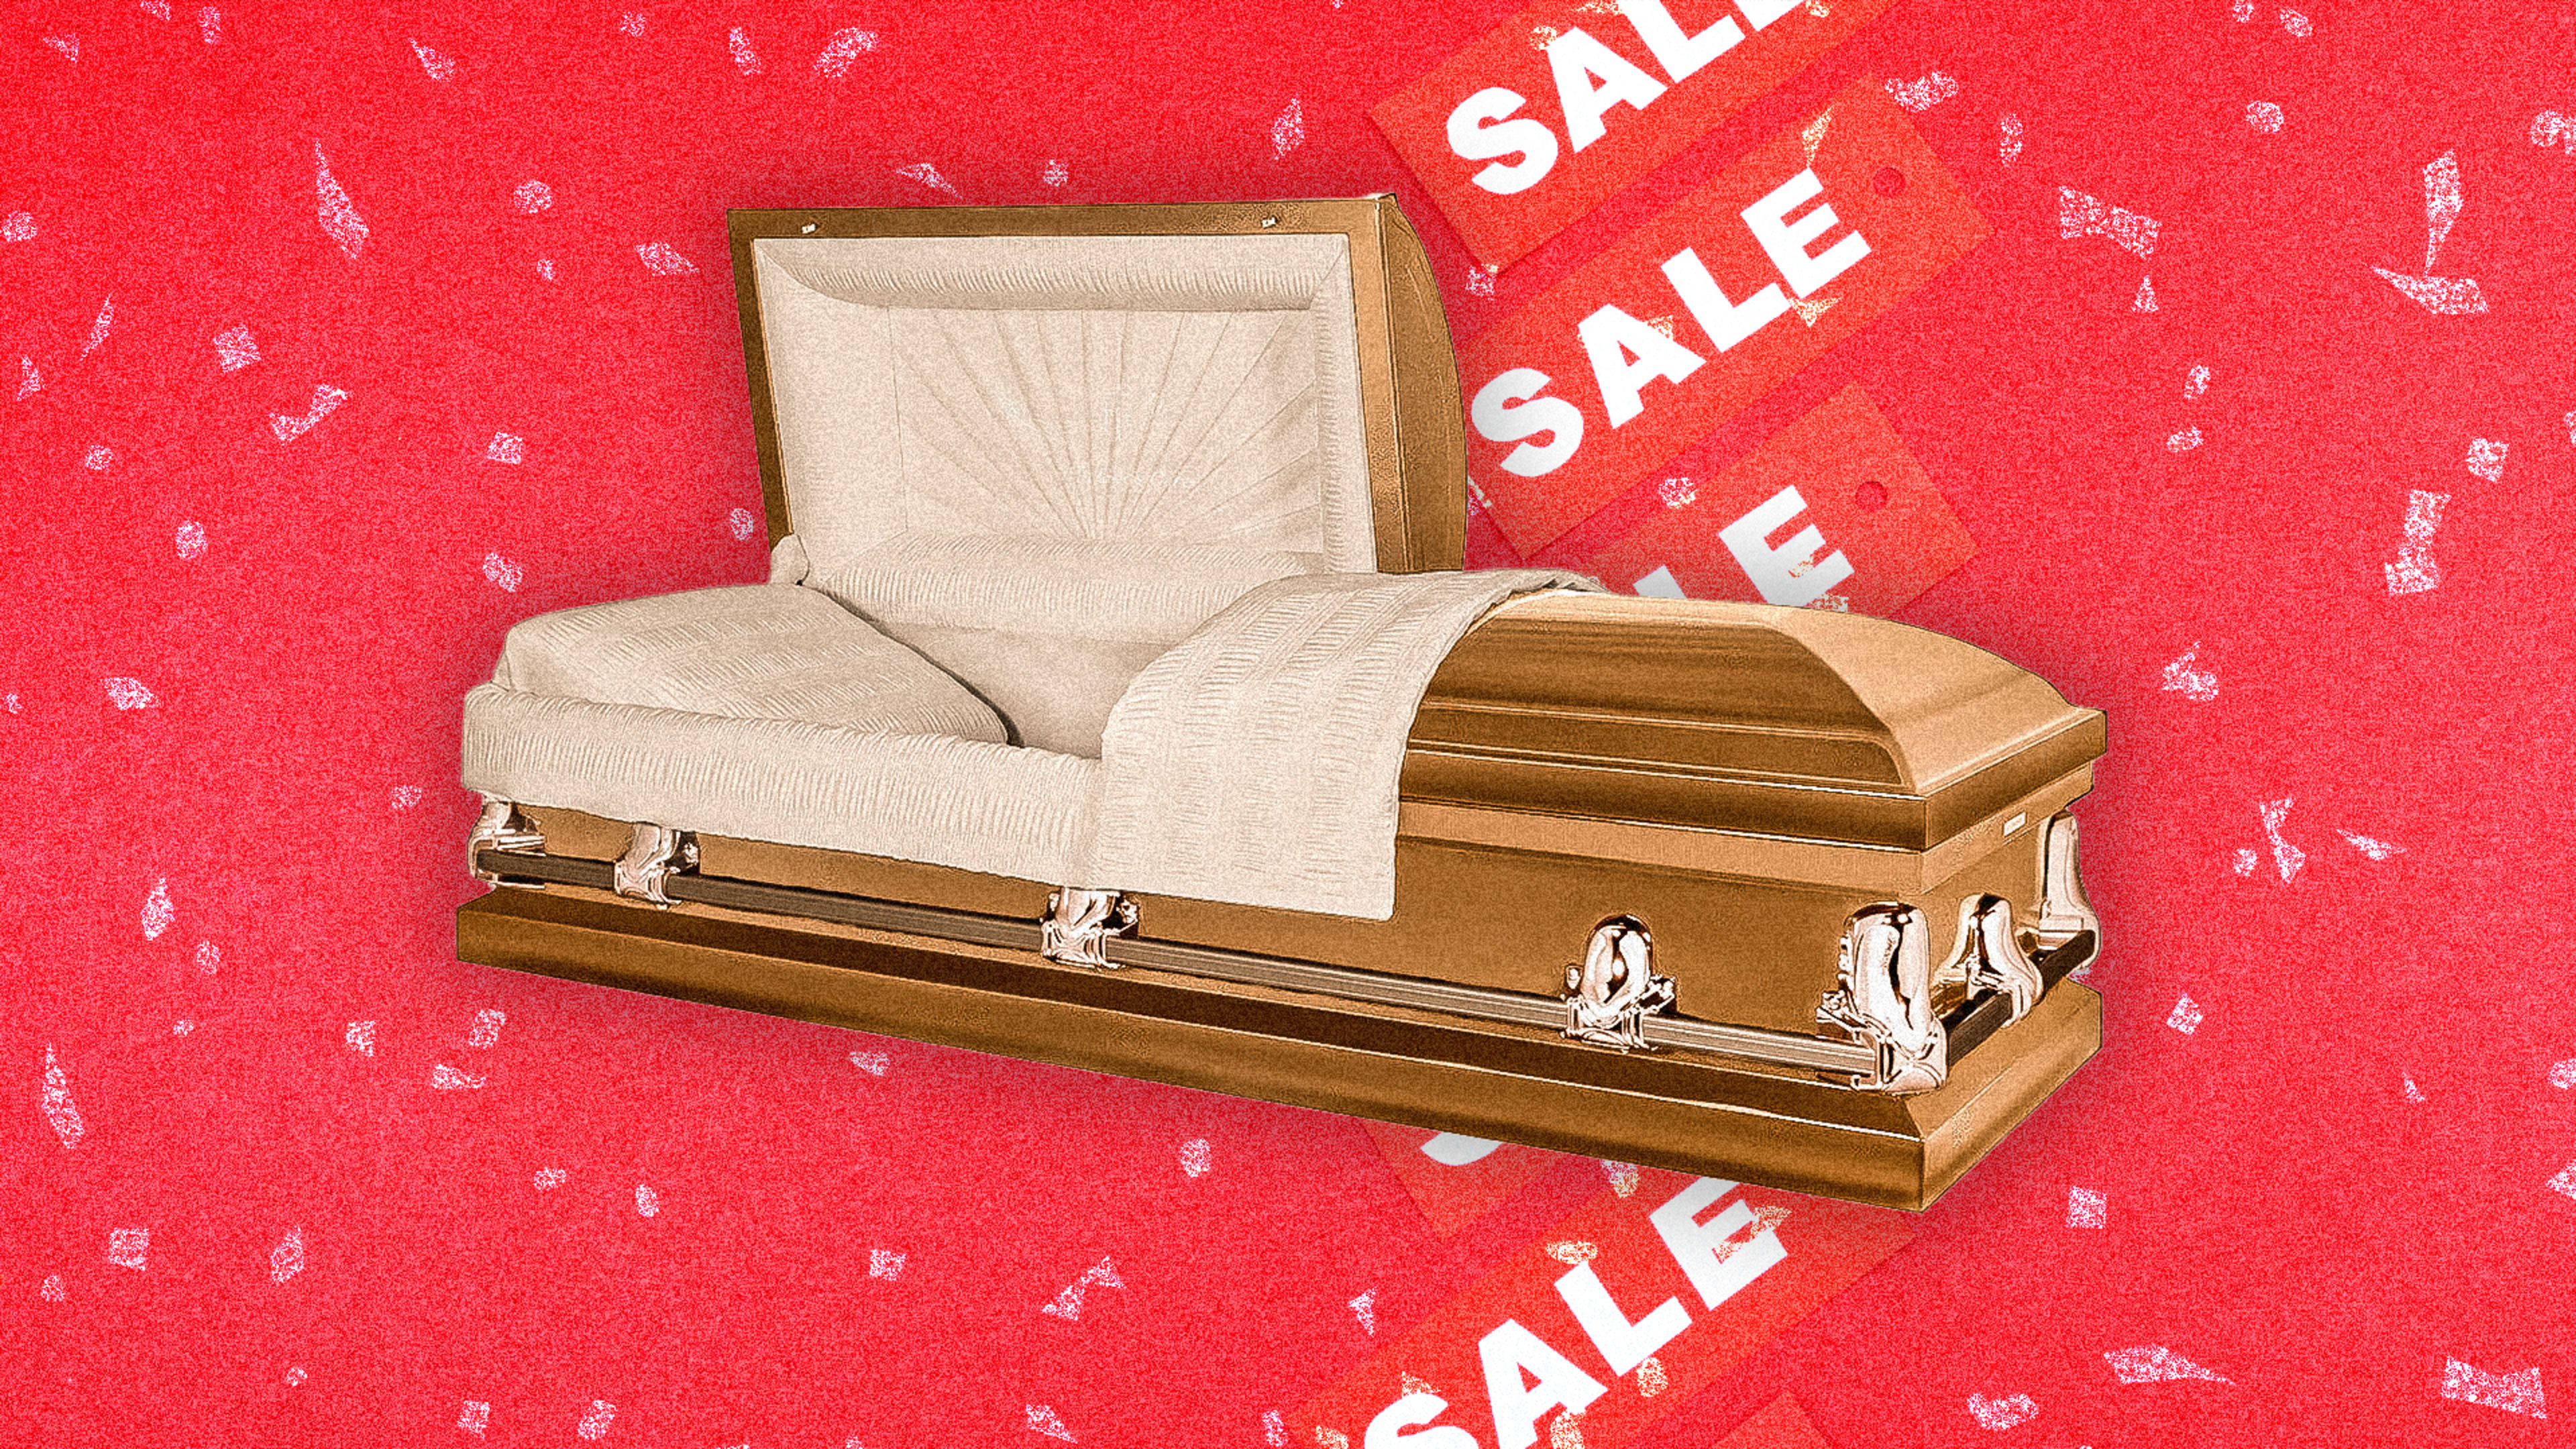 Taylor Swift’s favorite casket company says Black Friday is the perfect time to think about death